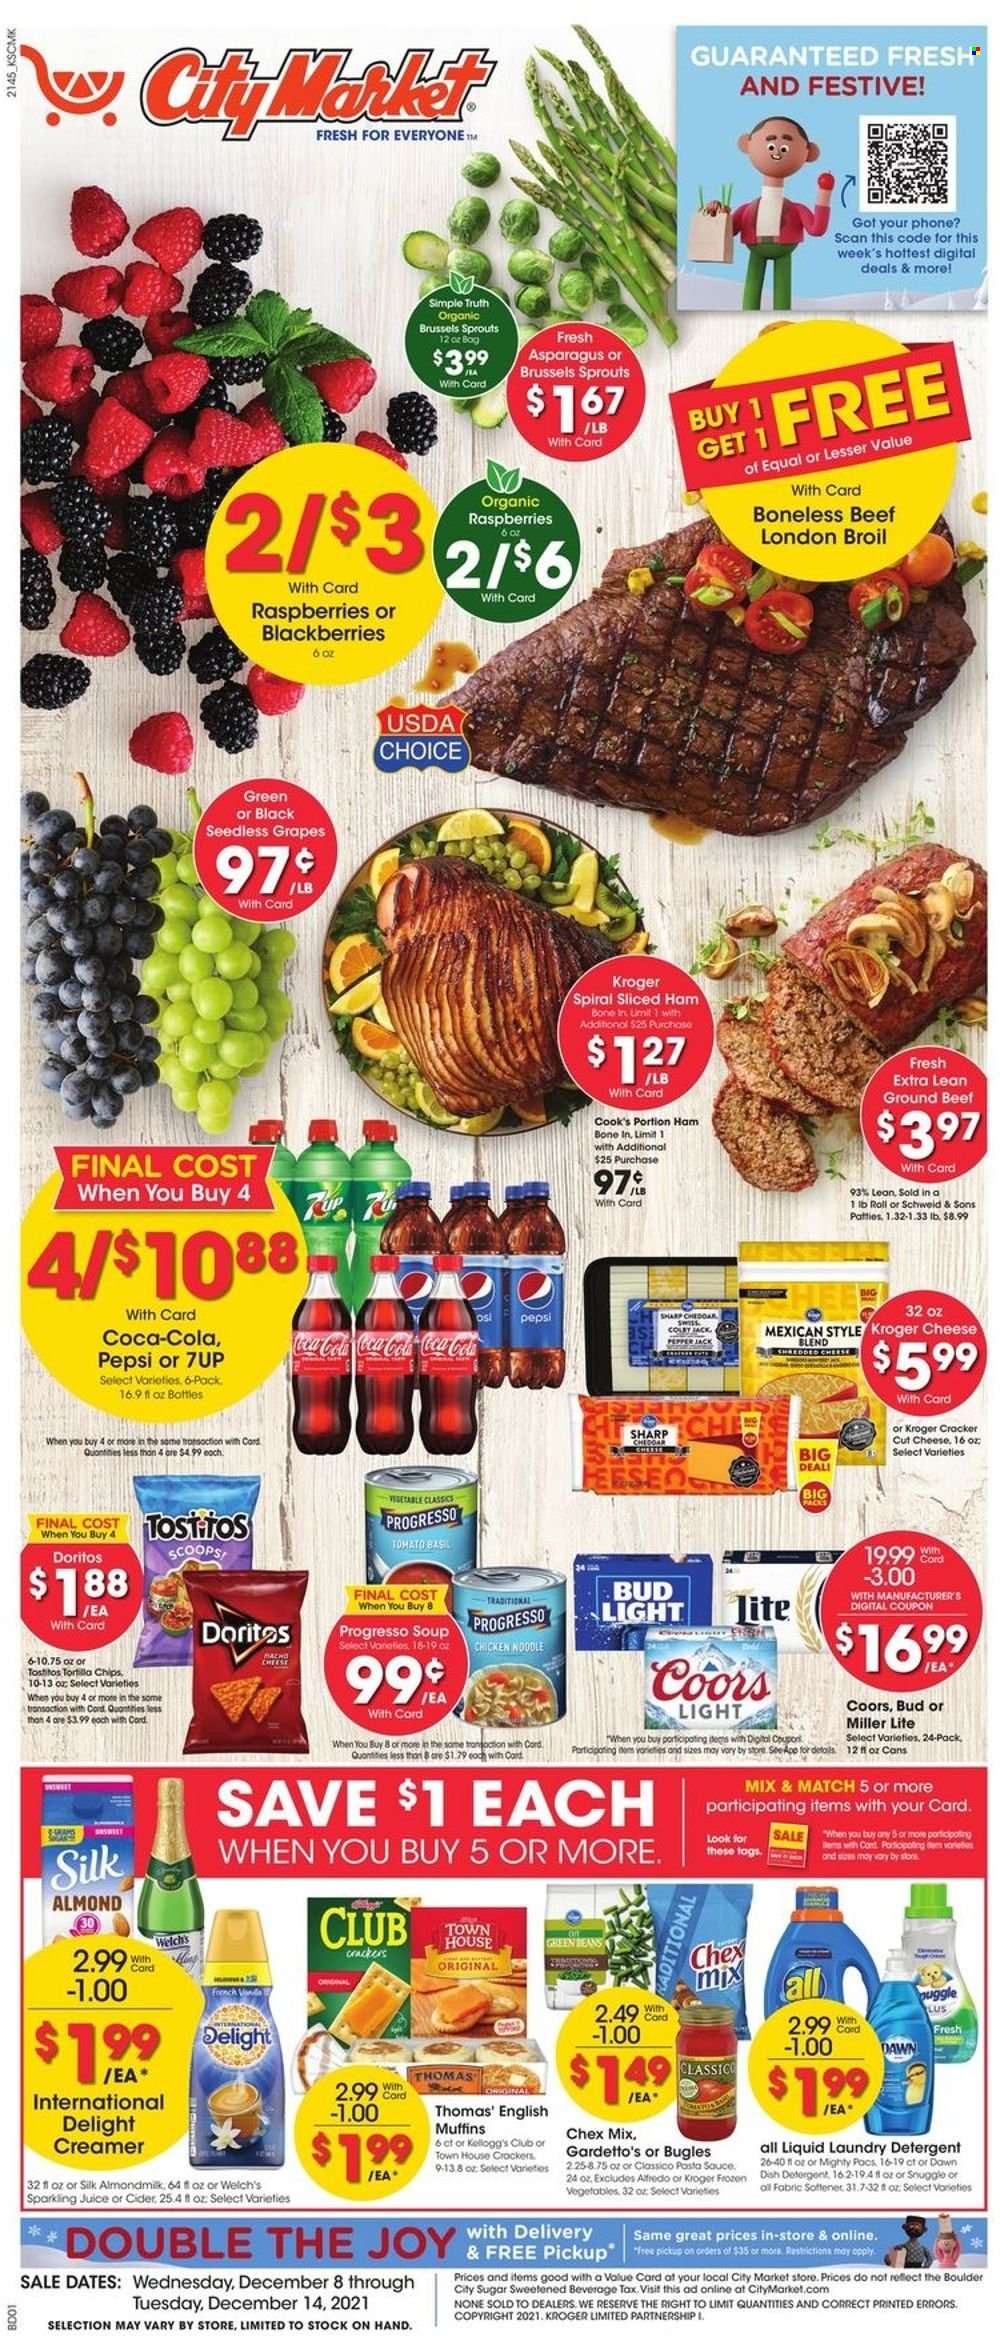 thumbnail - City Market Flyer - 12/08/2021 - 12/14/2021 - Sales products - seedless grapes, english muffins, asparagus, beans, green beans, brussel sprouts, blackberries, grapes, Welch's, Progresso, ham, Cook's, cheese, almond milk, creamer, crackers, Kellogg's, Doritos, Chex Mix, sugar, esponja, Classico, Coca-Cola, Pepsi, juice, 7UP, sparkling juice, cider, beer, Bud Light, beef meat, ground beef, detergent, Snuggle, fabric softener, laundry detergent, Sharp, Miller Lite, Coors. Page 1.